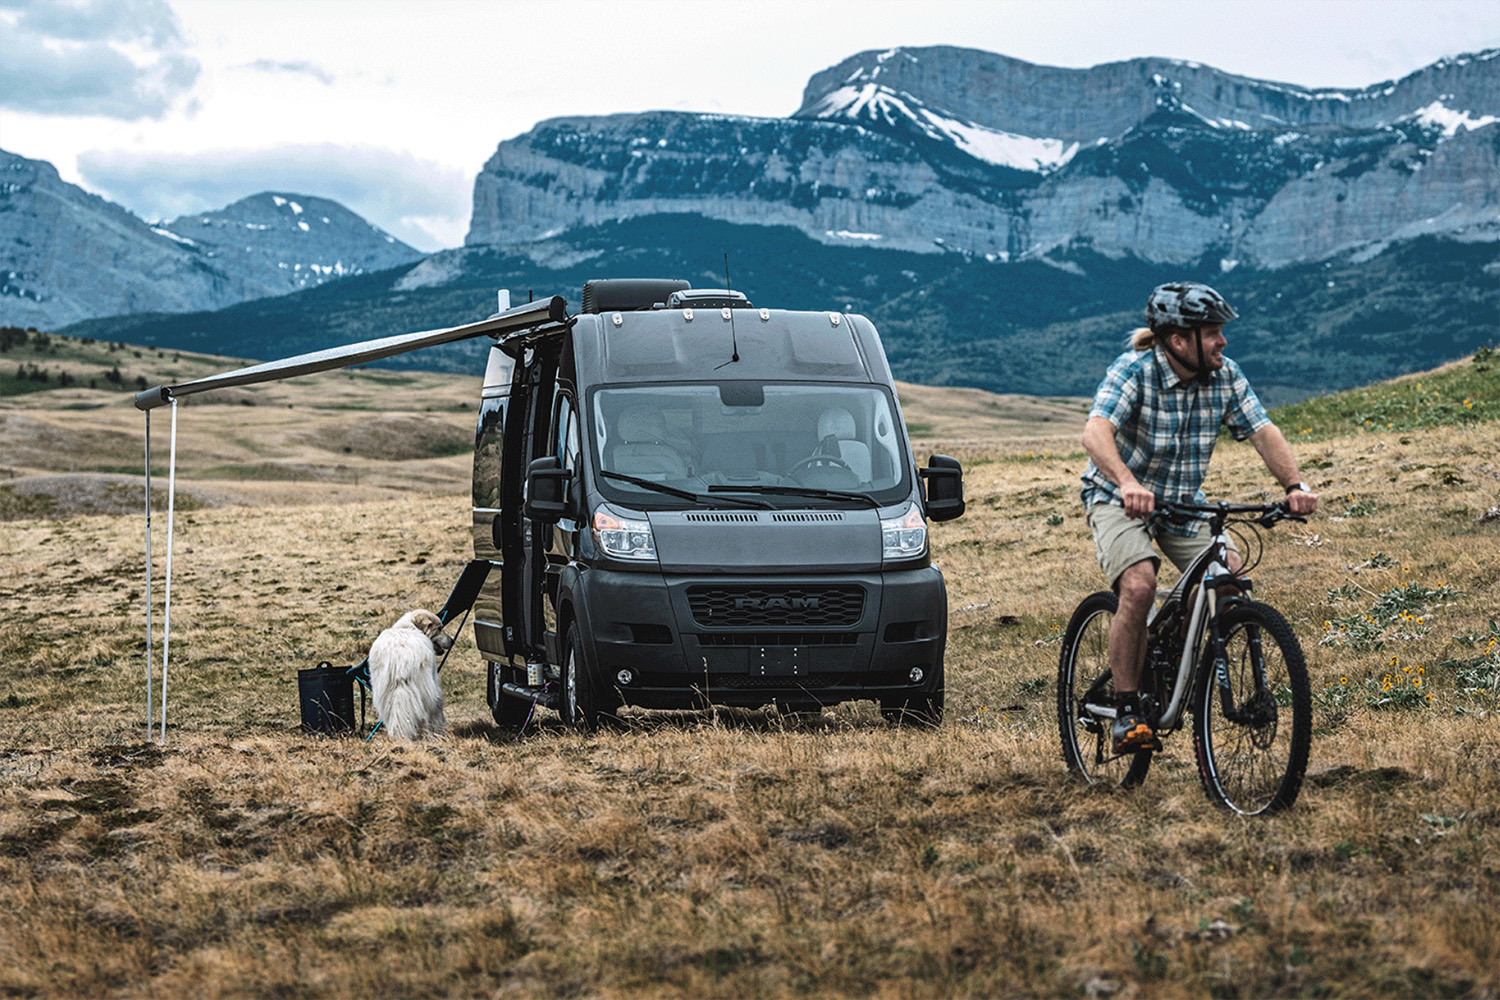 A man biking away from an Airstream Van in a grassy valley next to mountains